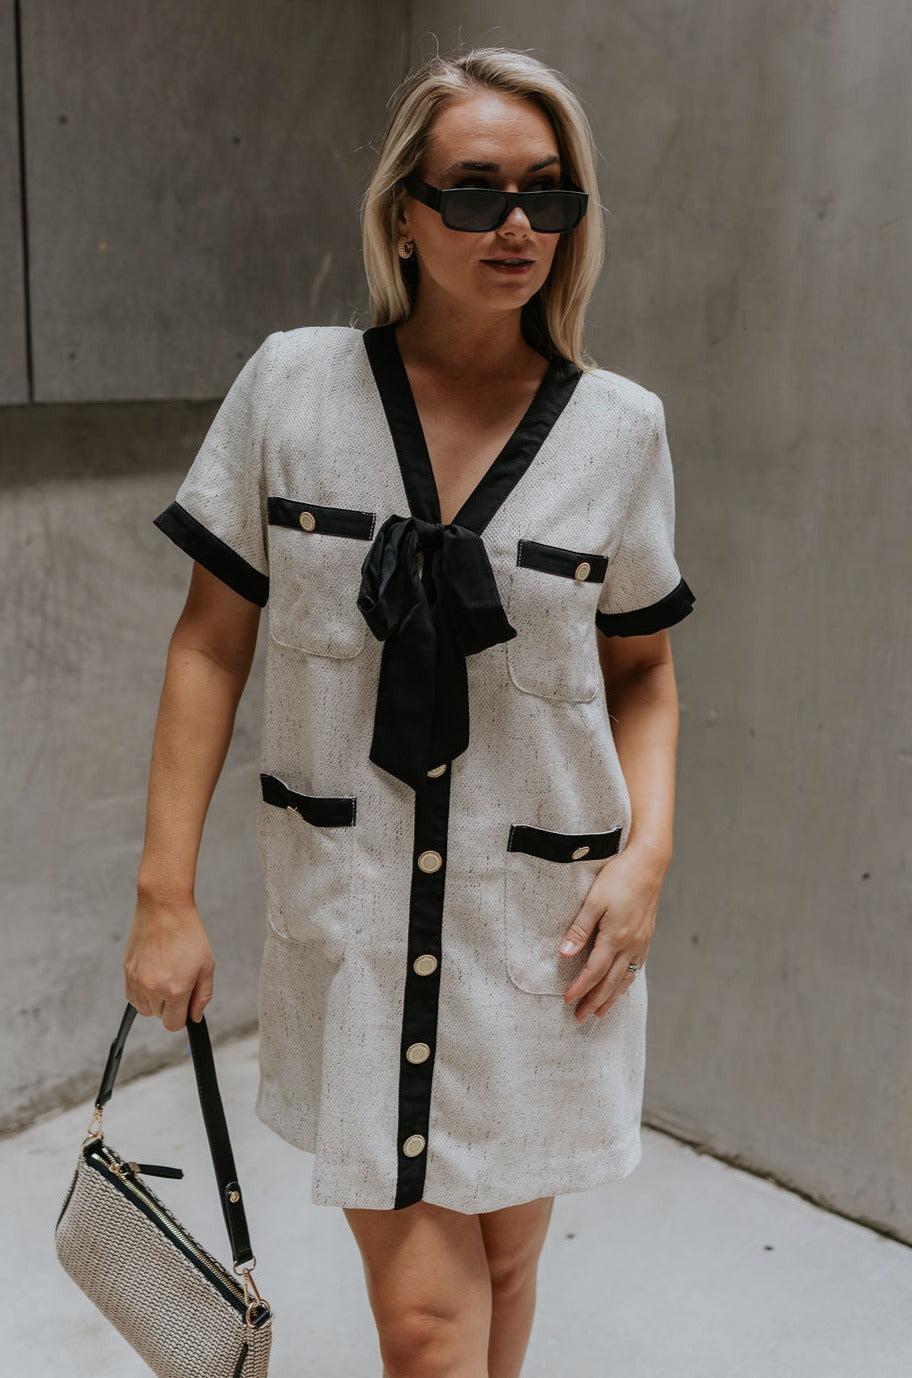 front view of female model wearing the Stevie Oatmeal & Black Short Sleeve Mini Dress which features Oatmeal Fabric, Black Trim Details, Mini Length, Anchor Button Up Detail, Four Buttoned Front Pockets, Black Tie Detail and Short Sleeves